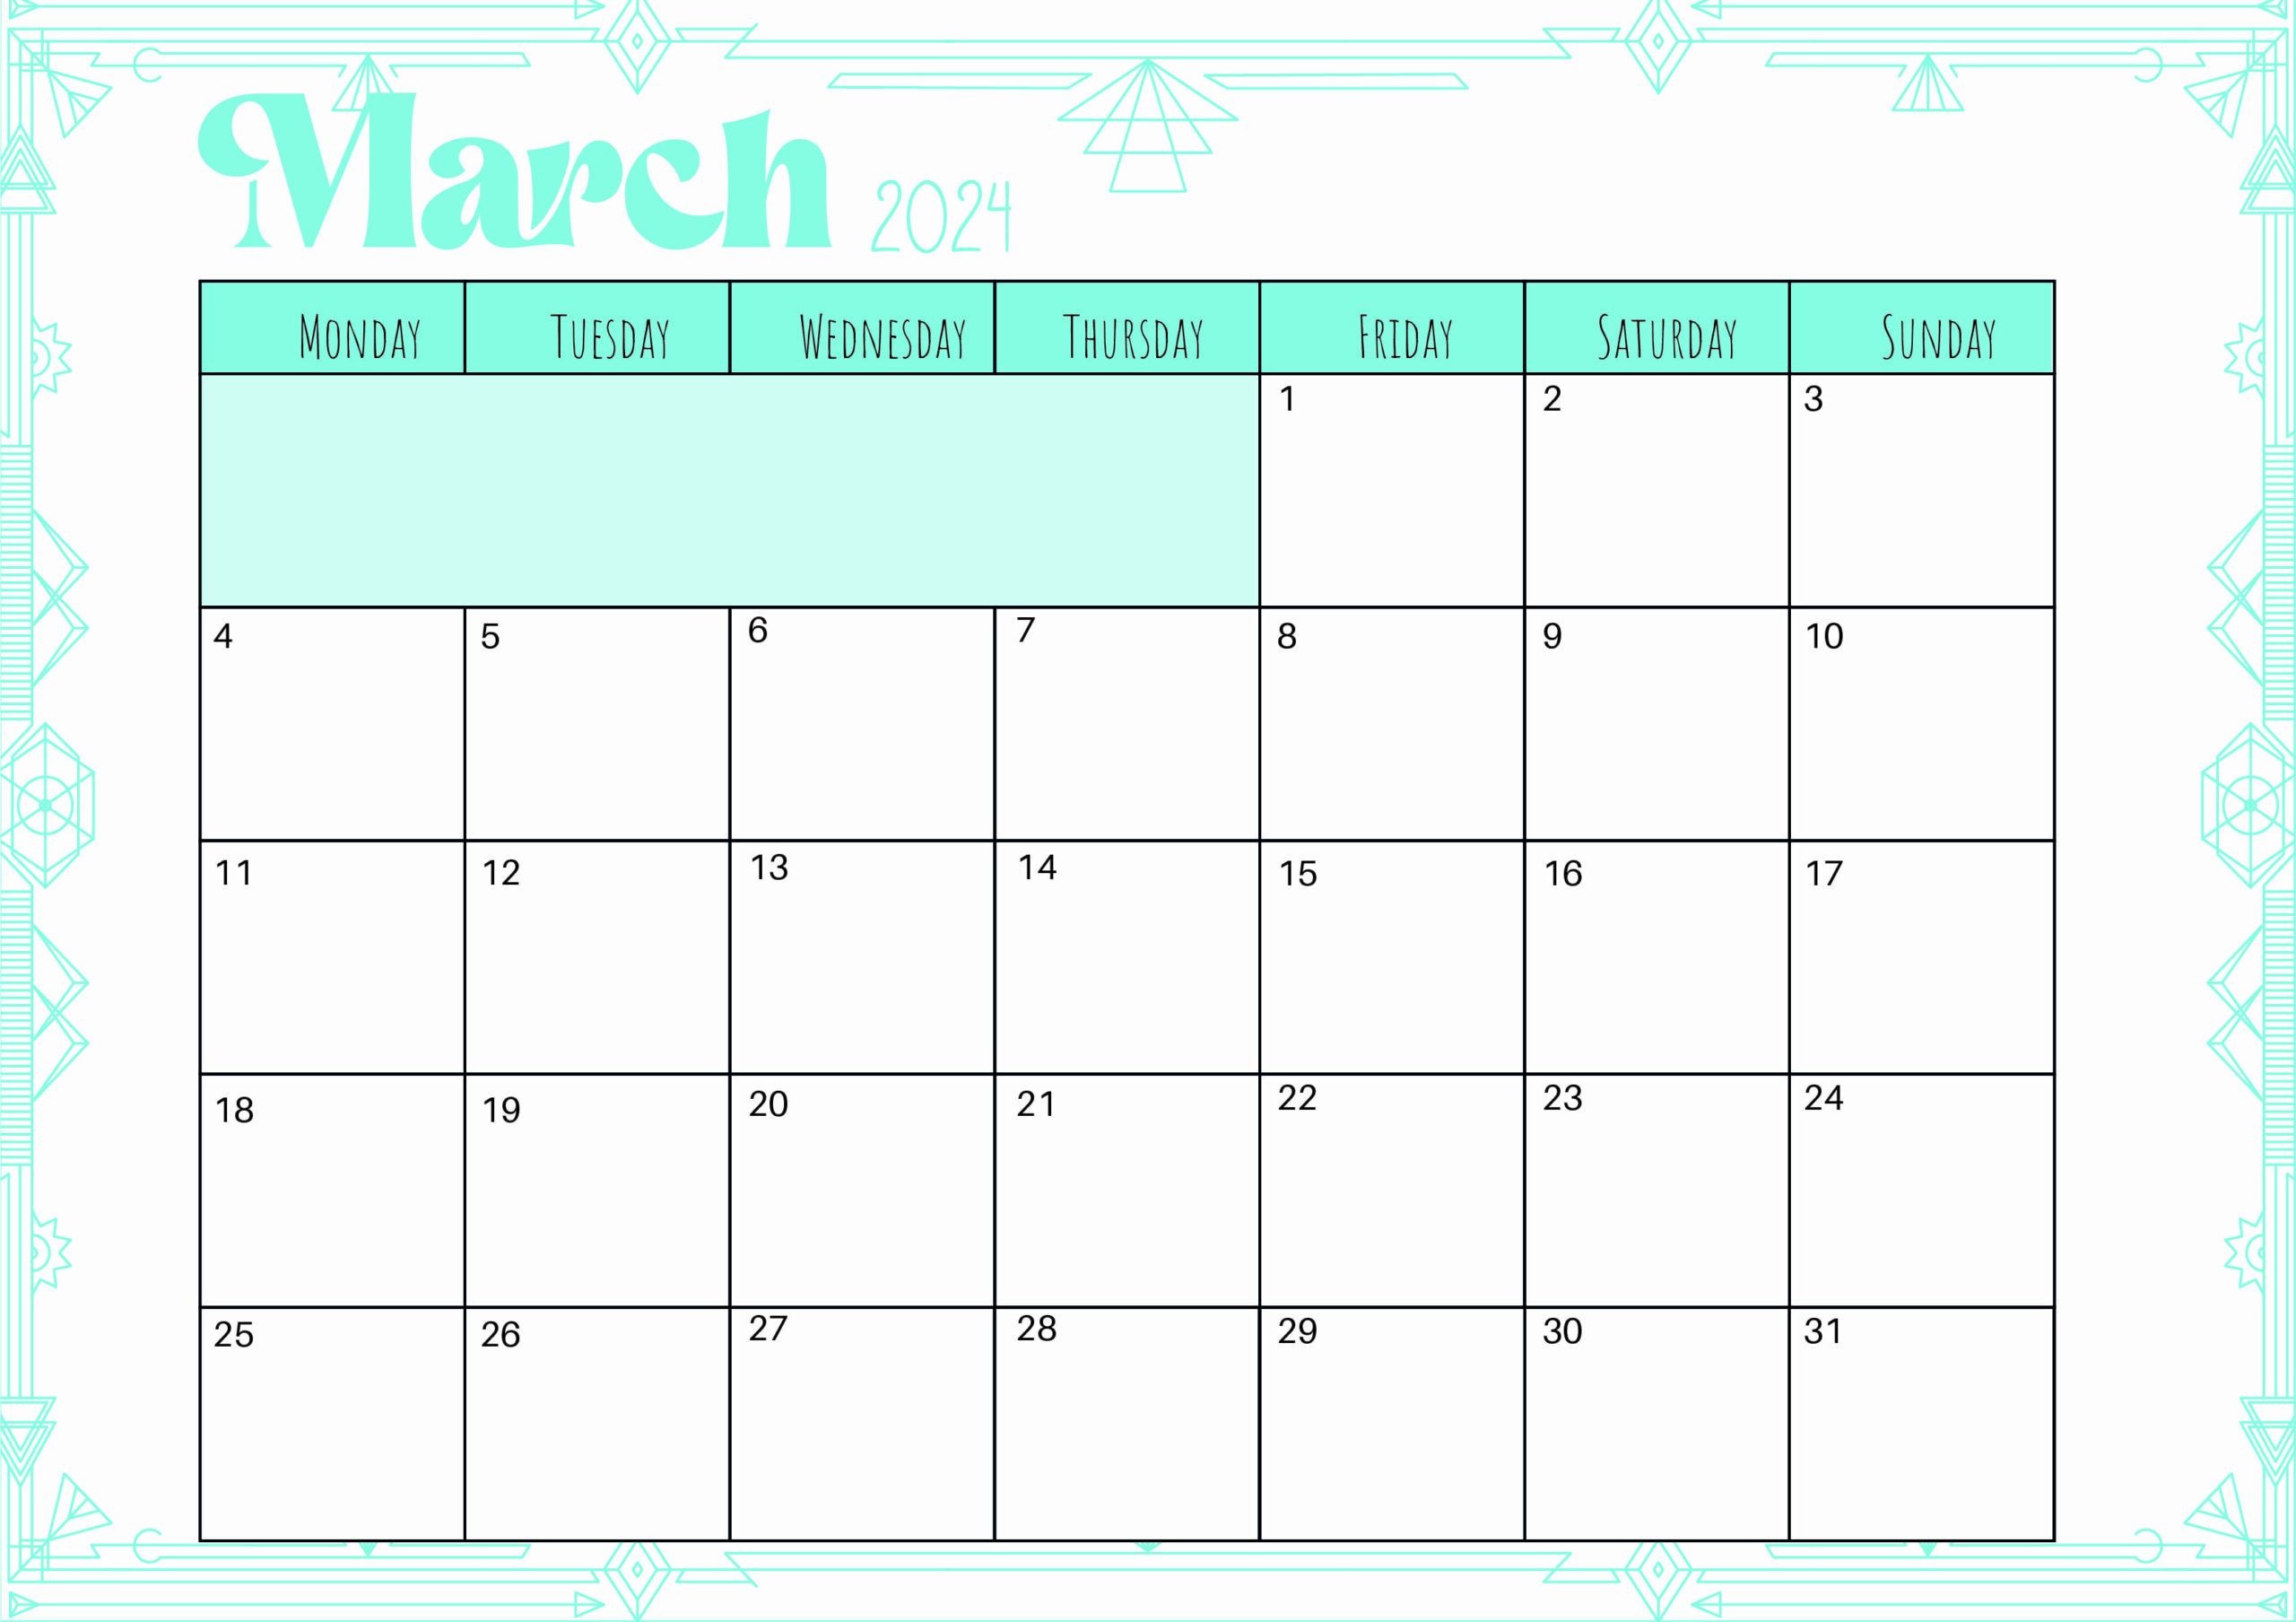 March 2024 Calendar for Printing